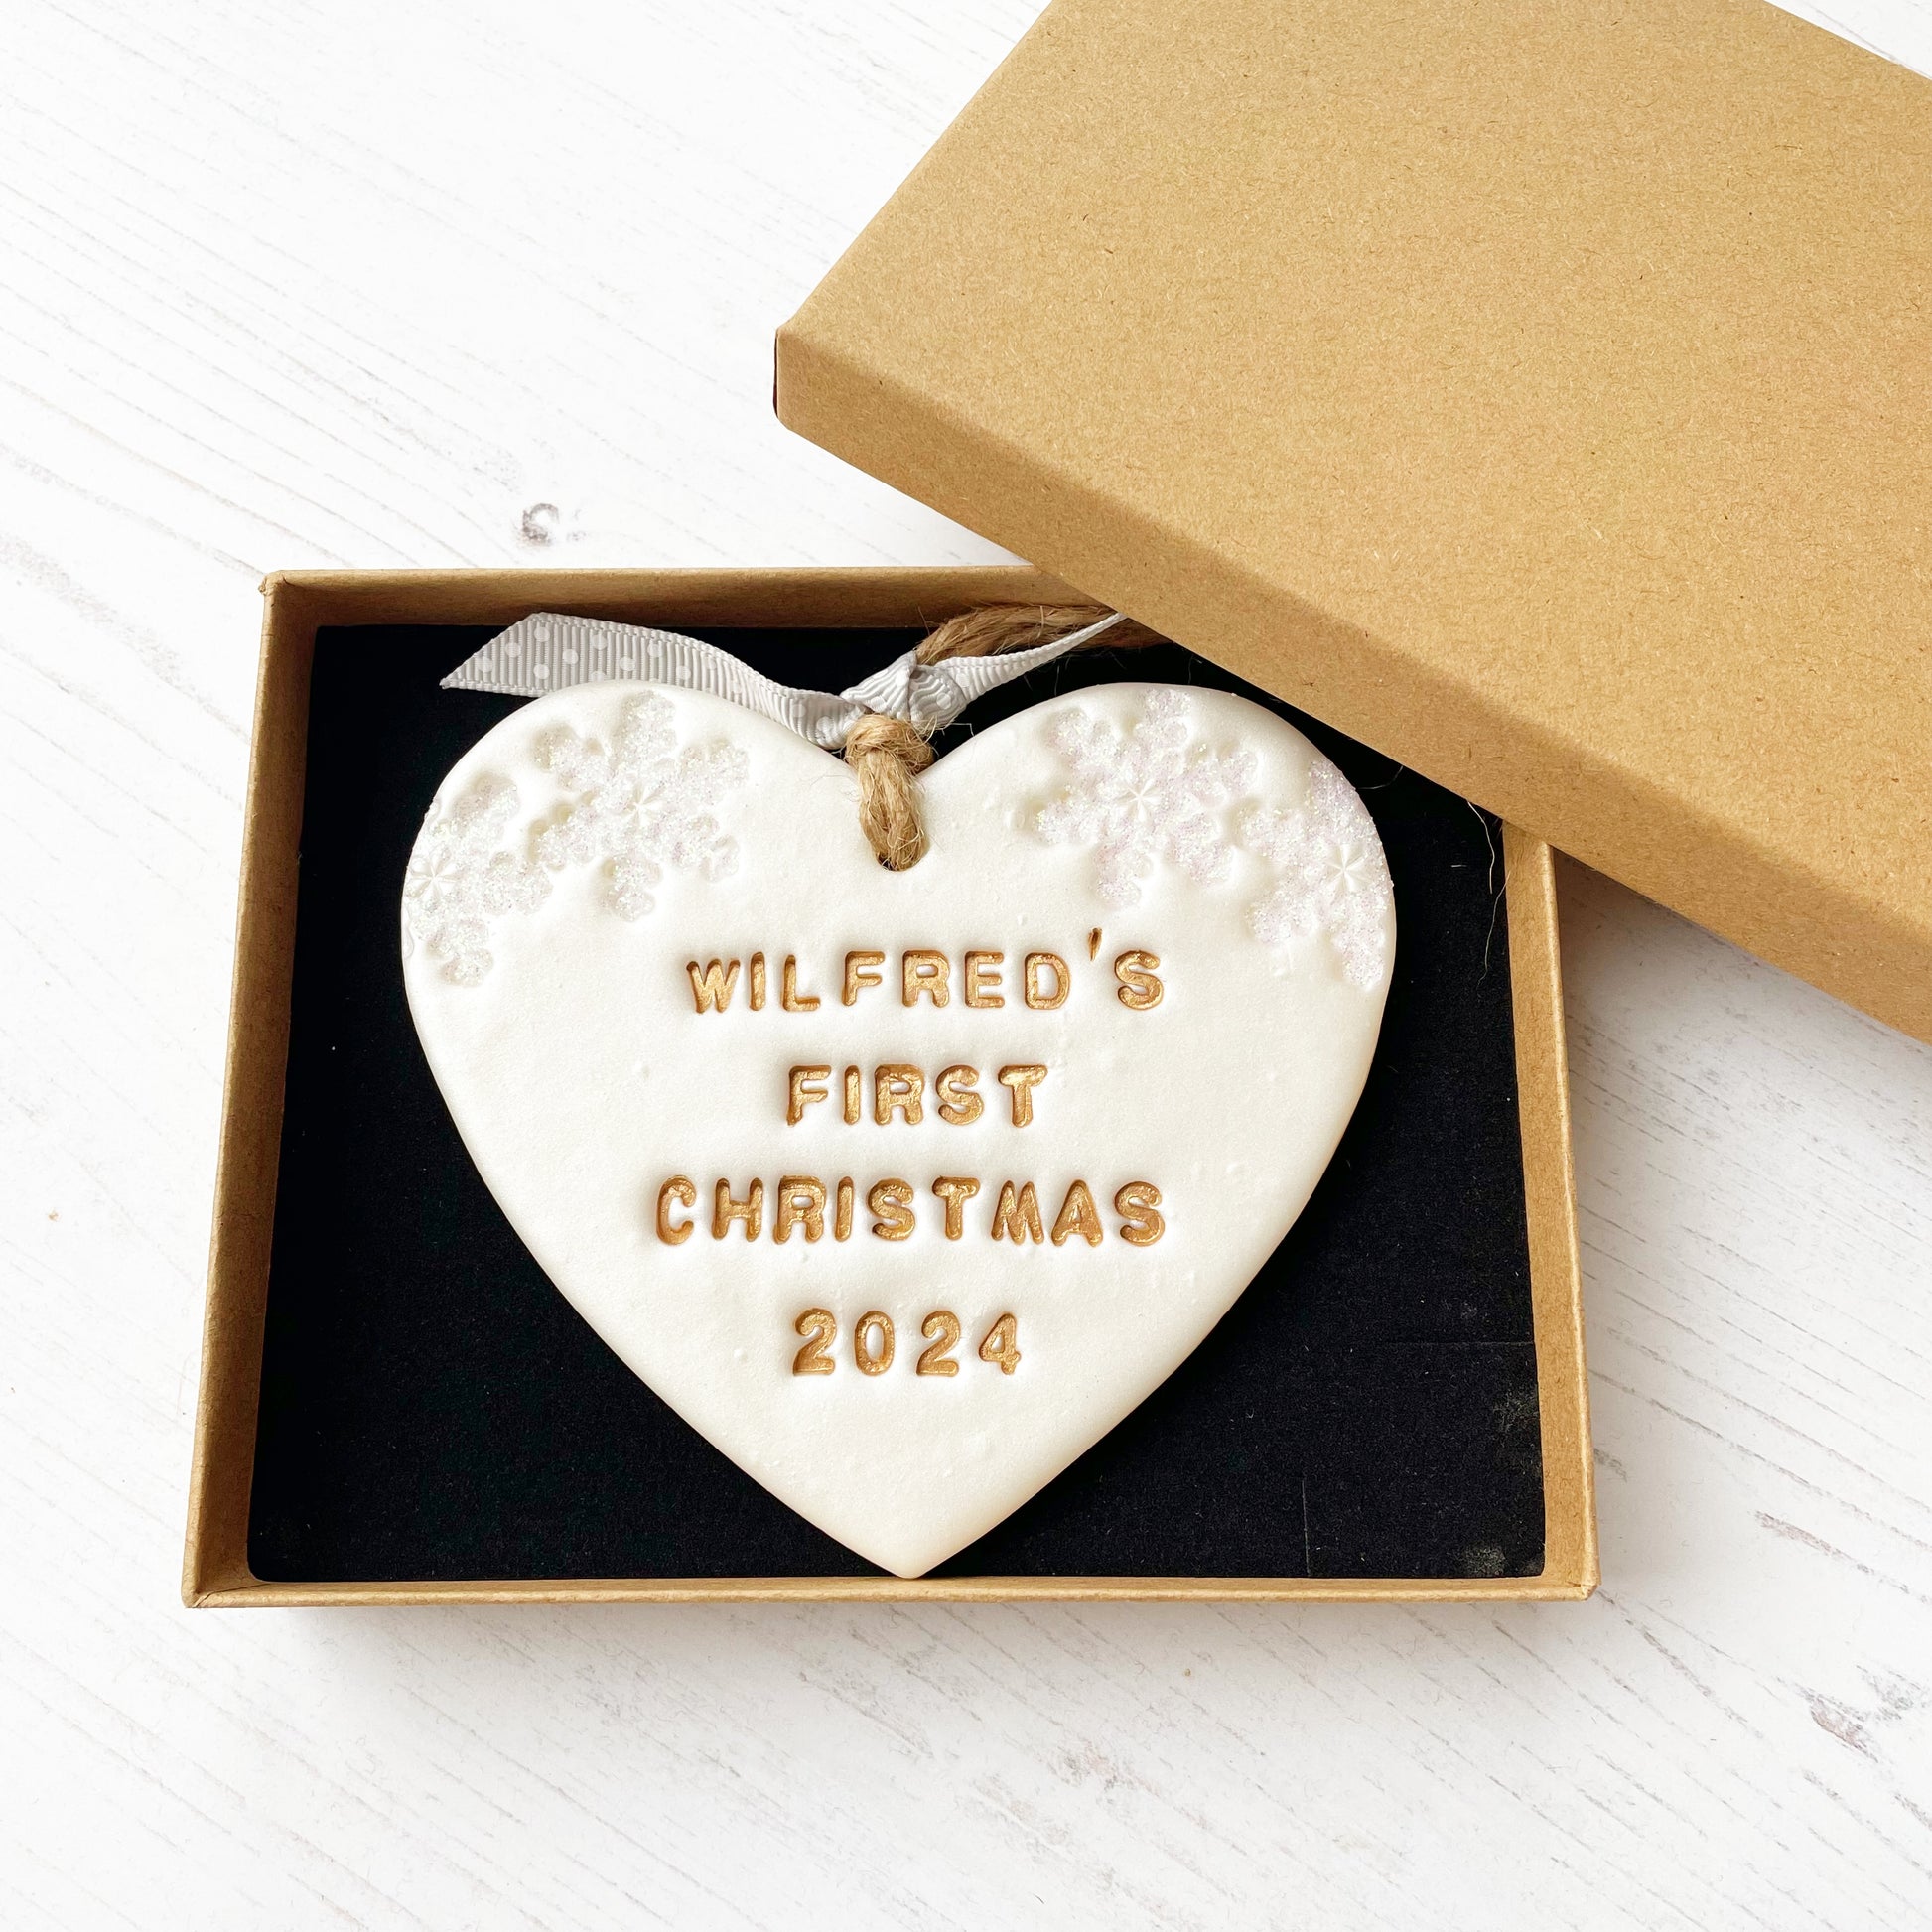 Personalised baby’s first Christmas heart ornament, pearlised white clay with WILFRED’S FIRST CHRISTMAS 2024 painted gold, decorated with 2 iridescent glitter snowflakes on either side of the top of the heart In a brown Kraft luxury gift box